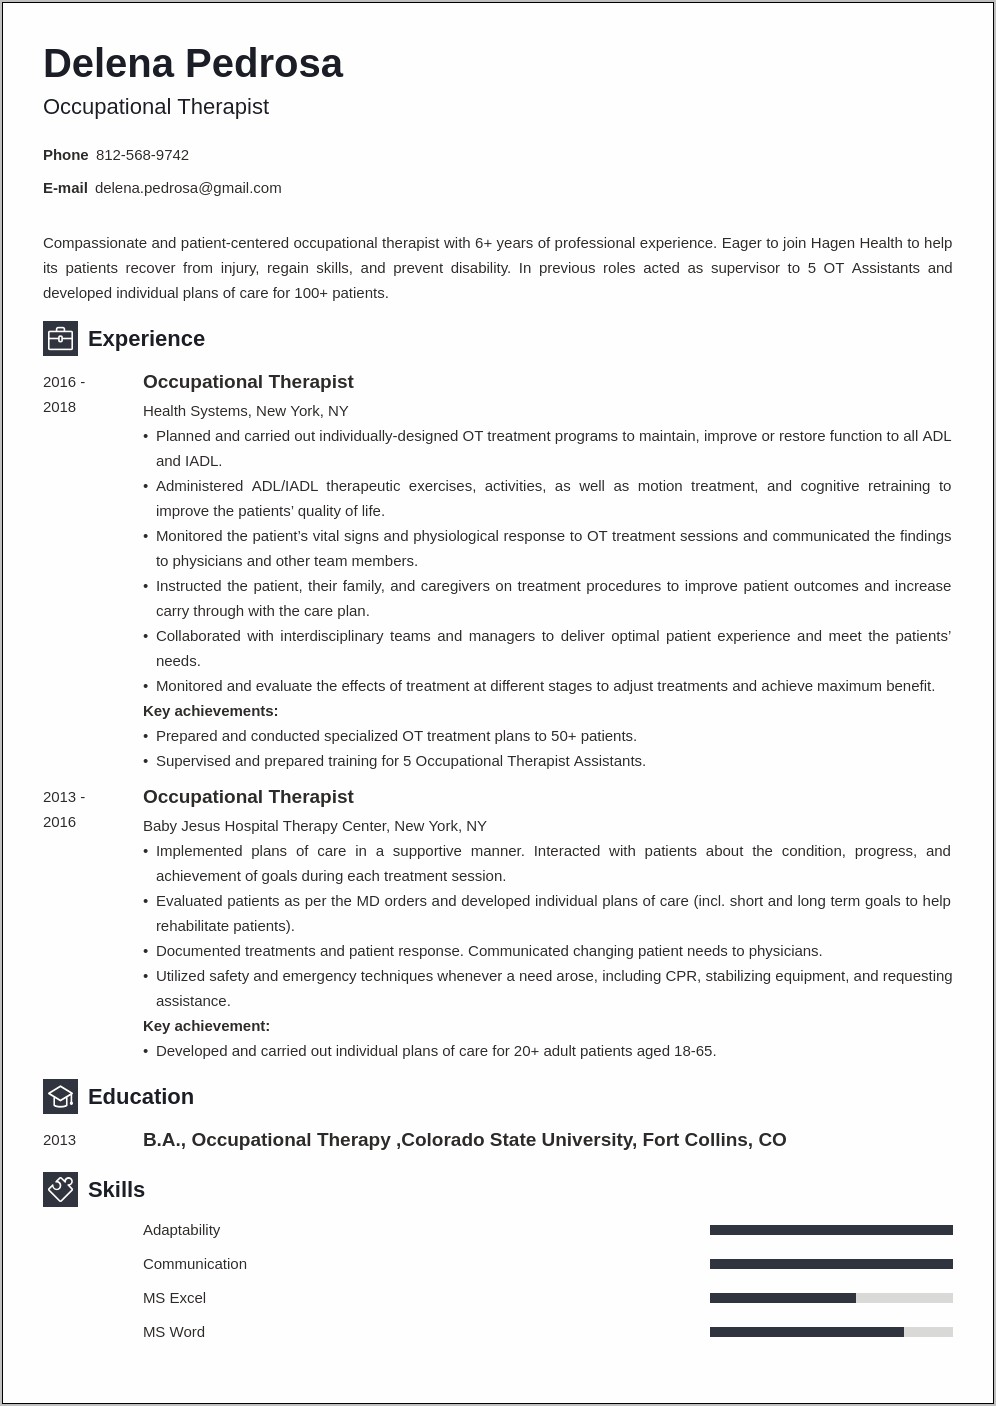 Sample Resume With Fieldwork Experience